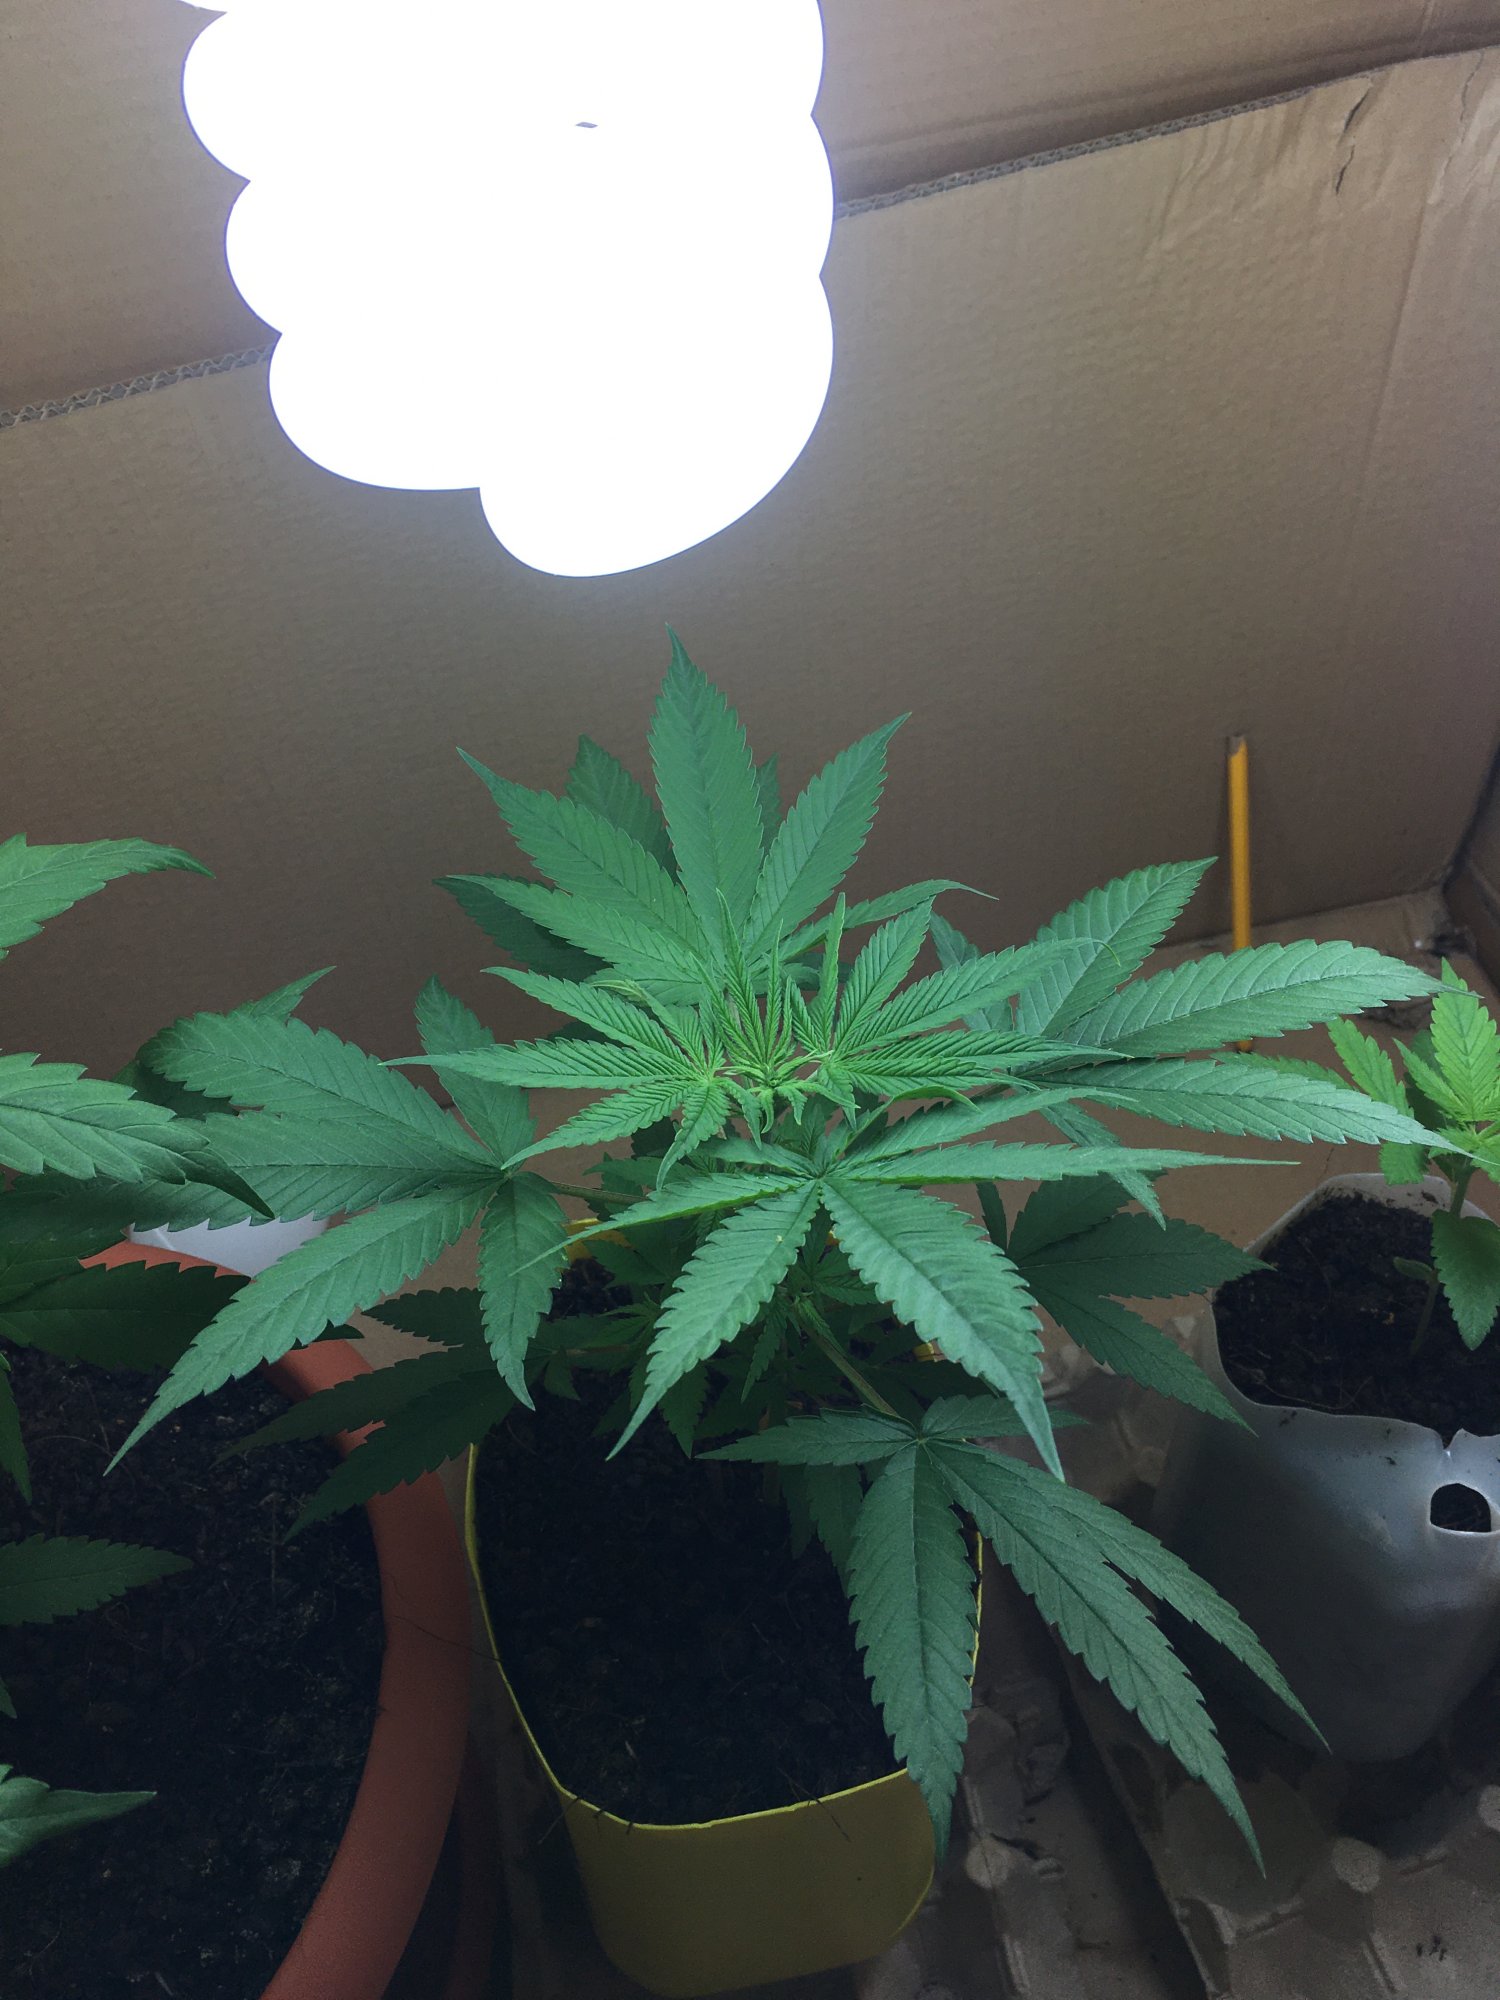 Help please first time grow bag seeds so just experimenting 2